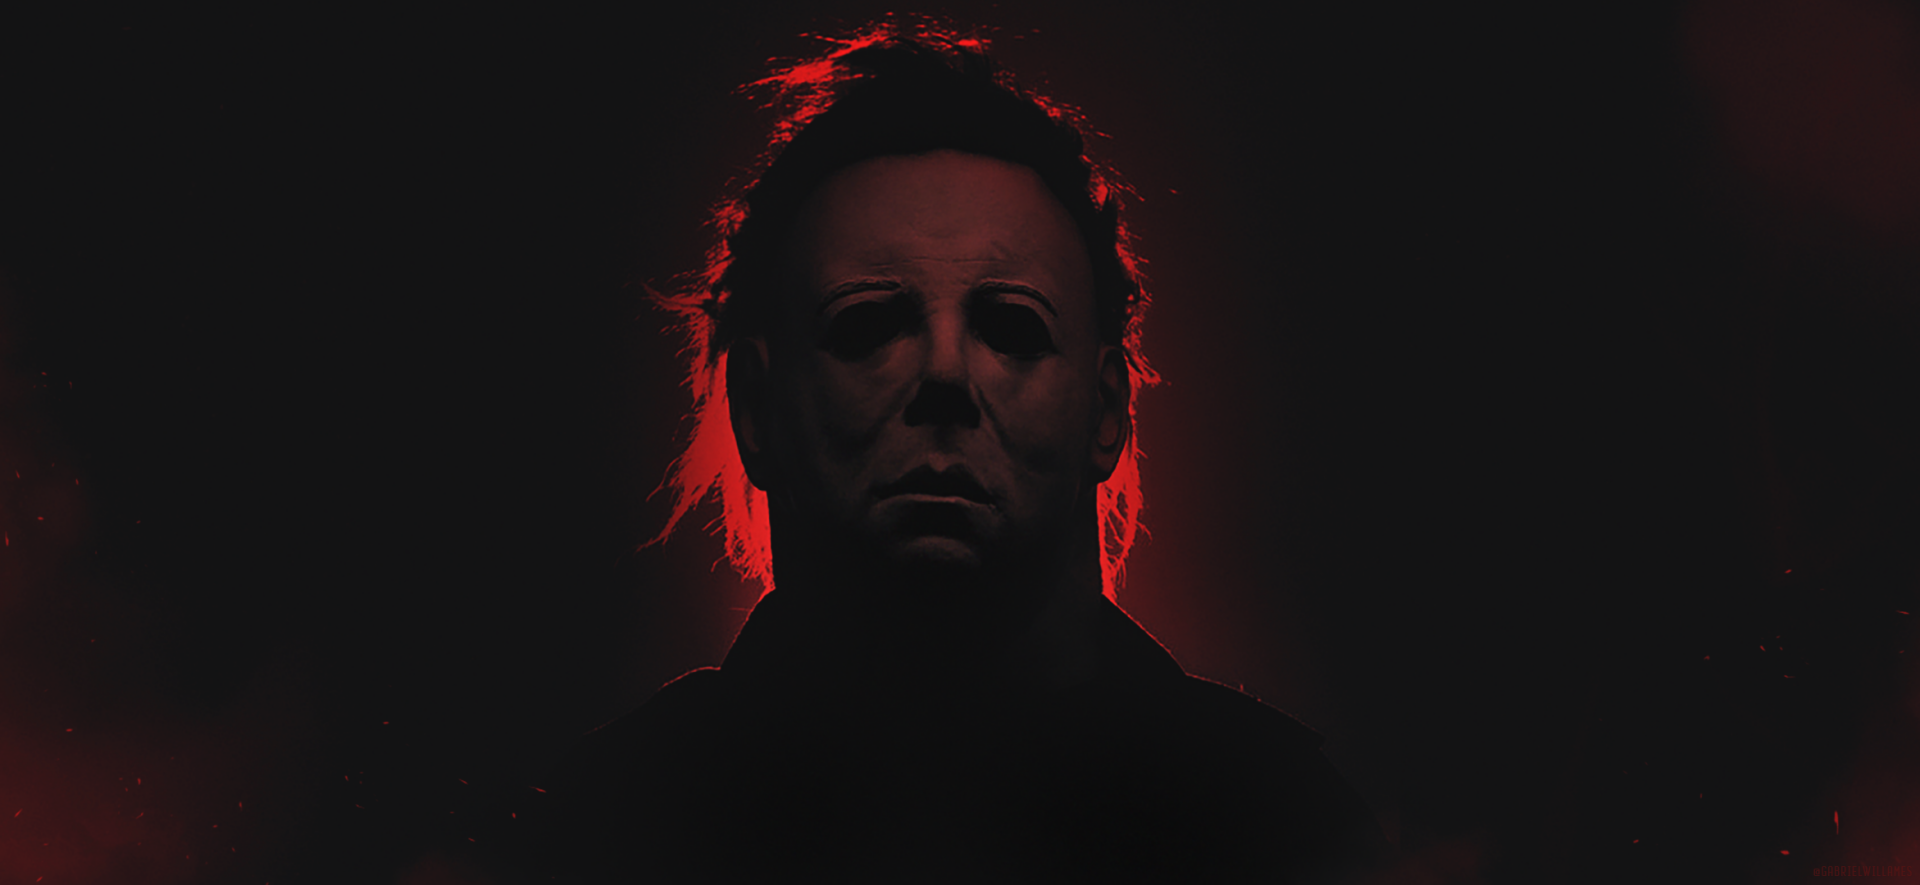 Michael Myers Nightmare HD Wallpaper | Background Image | 2342x1080 | ID:839562 - Wallpaper Abyss